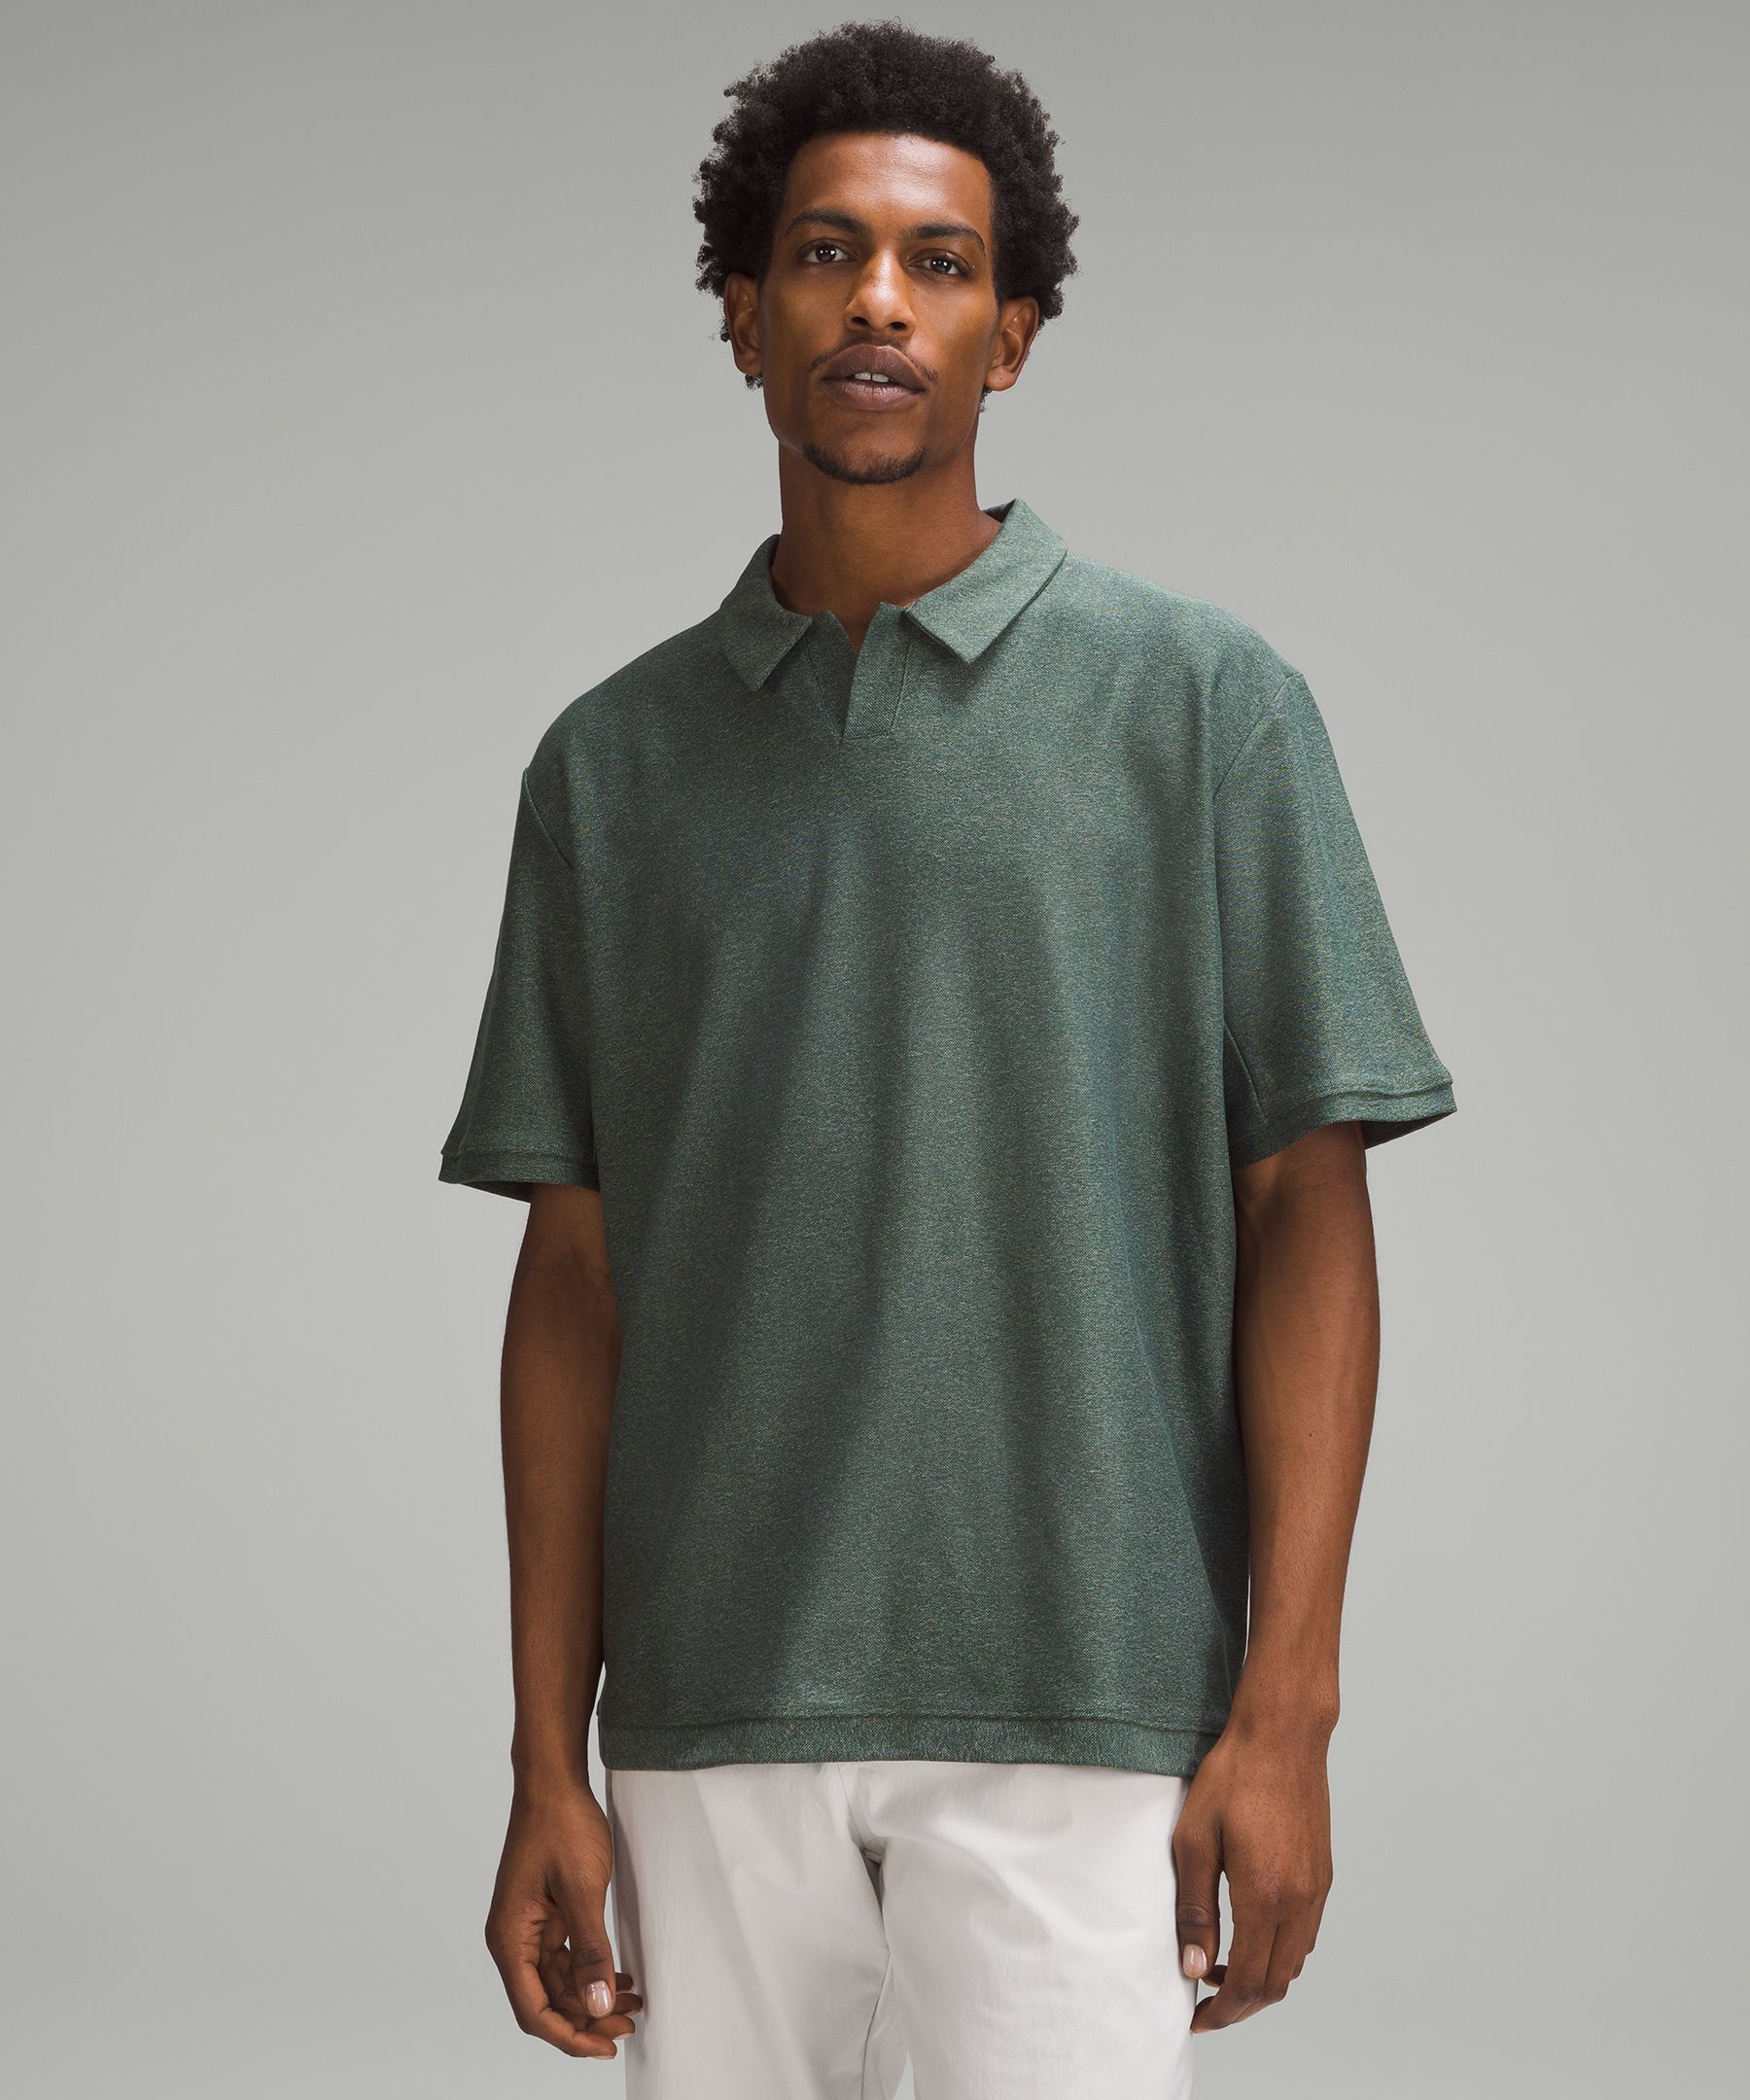 Lululemon Relaxed-Fit Polo Shirt